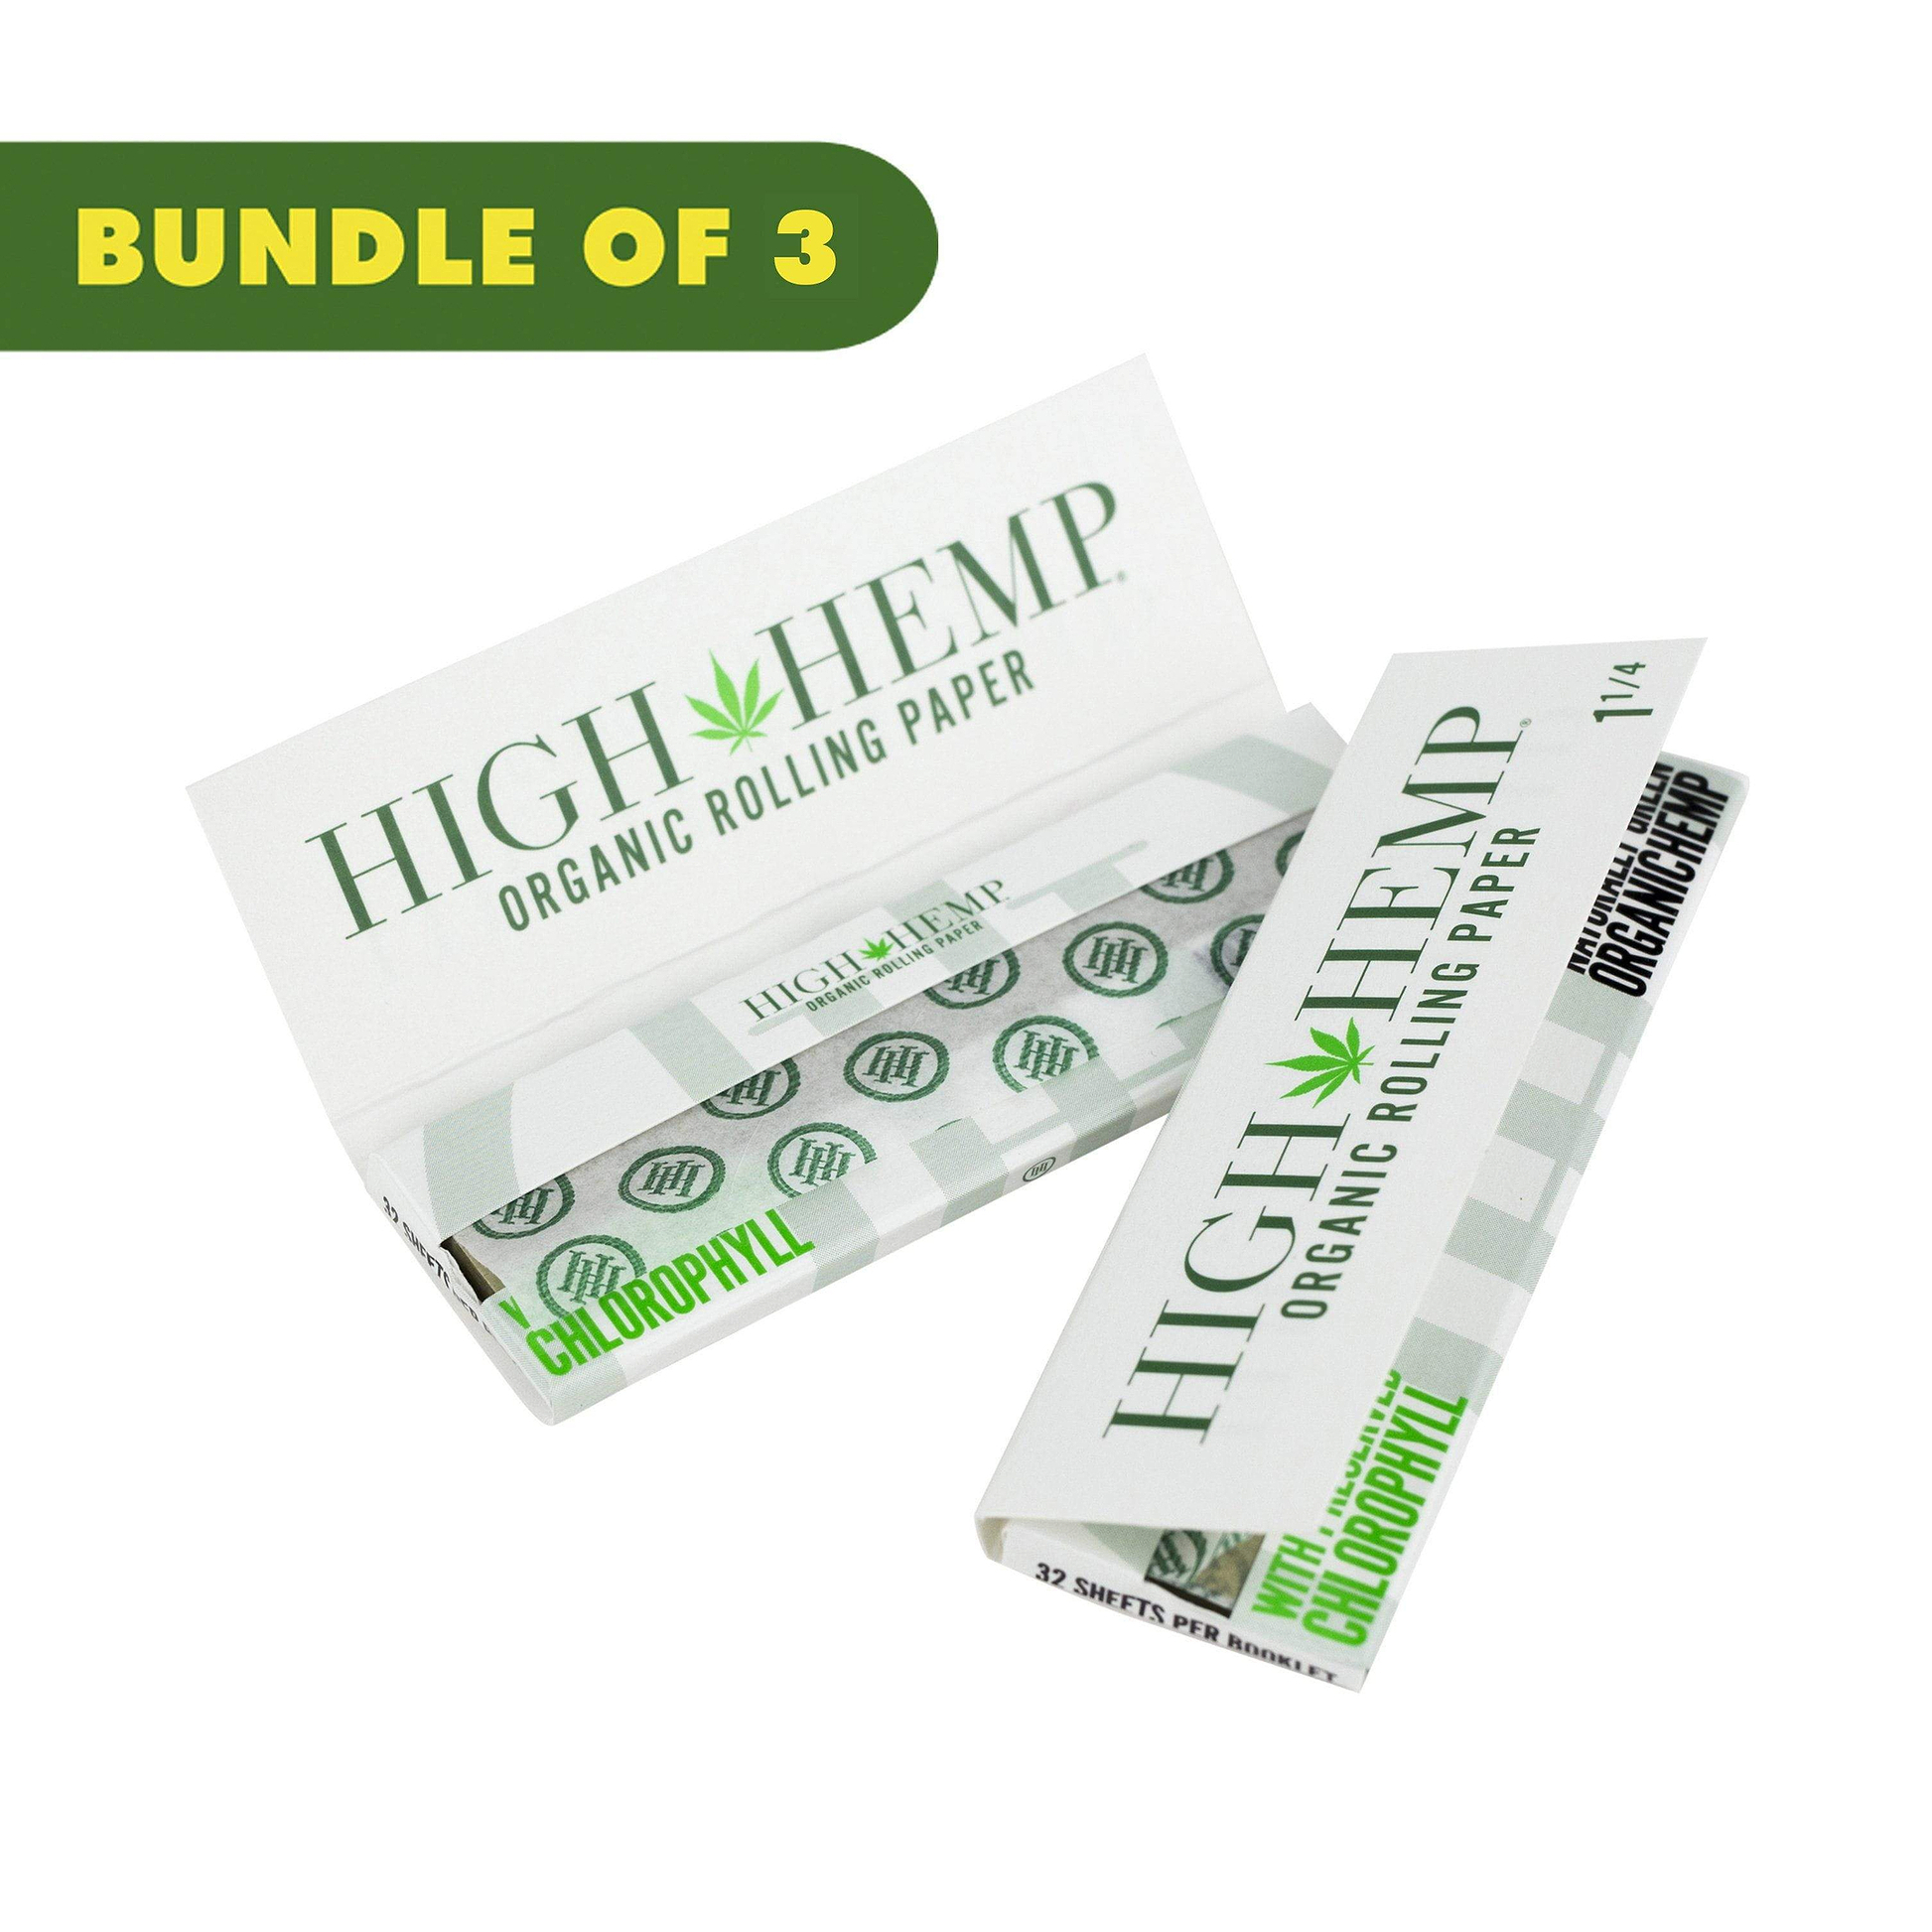 3 packs of thin organic rolling papers weed filtration smoking accessory classic look weed leaf design High Hemp logo